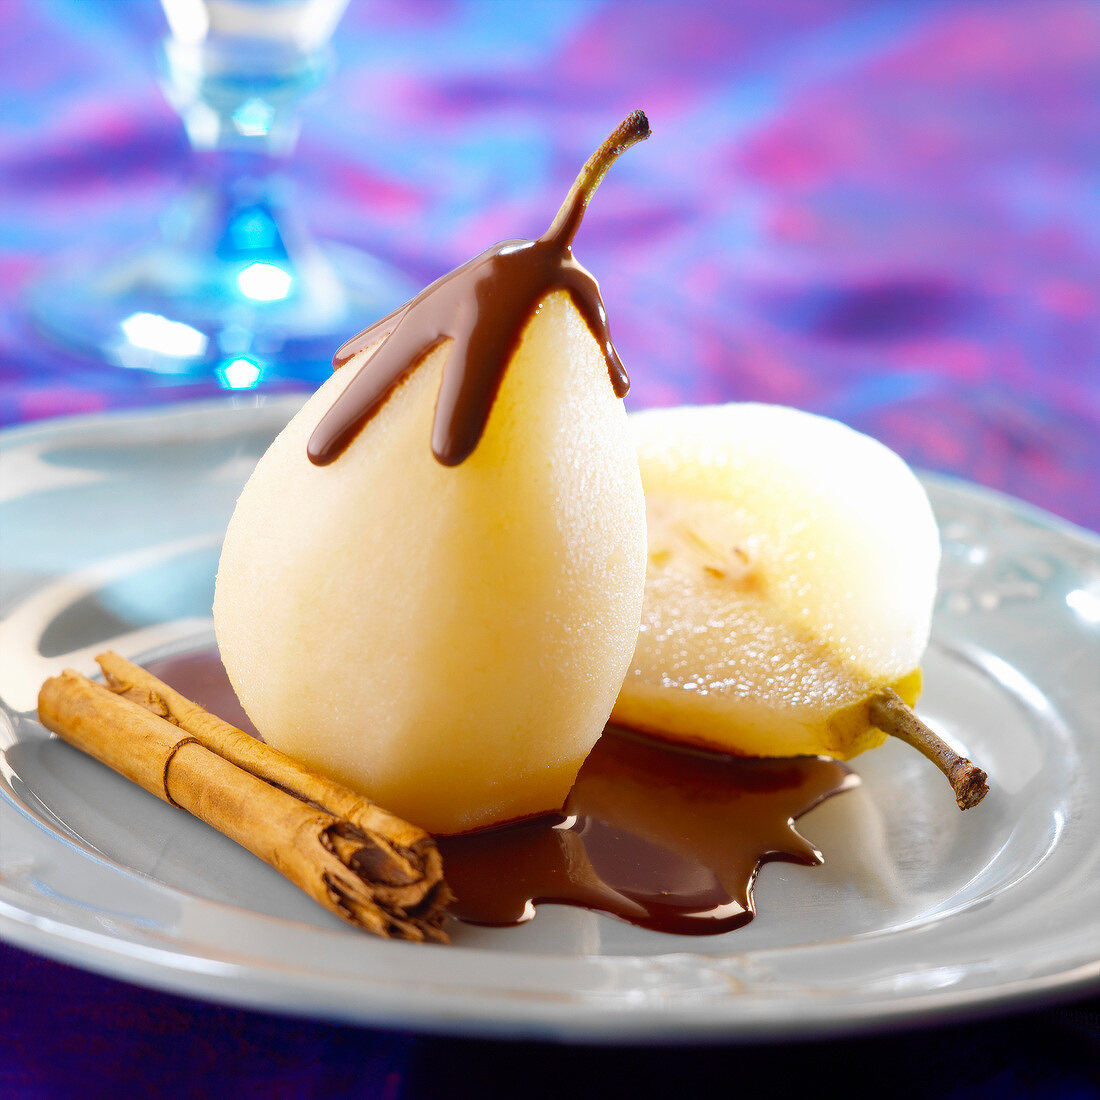 Poached pears with cinnamon-flavored melted chocolate